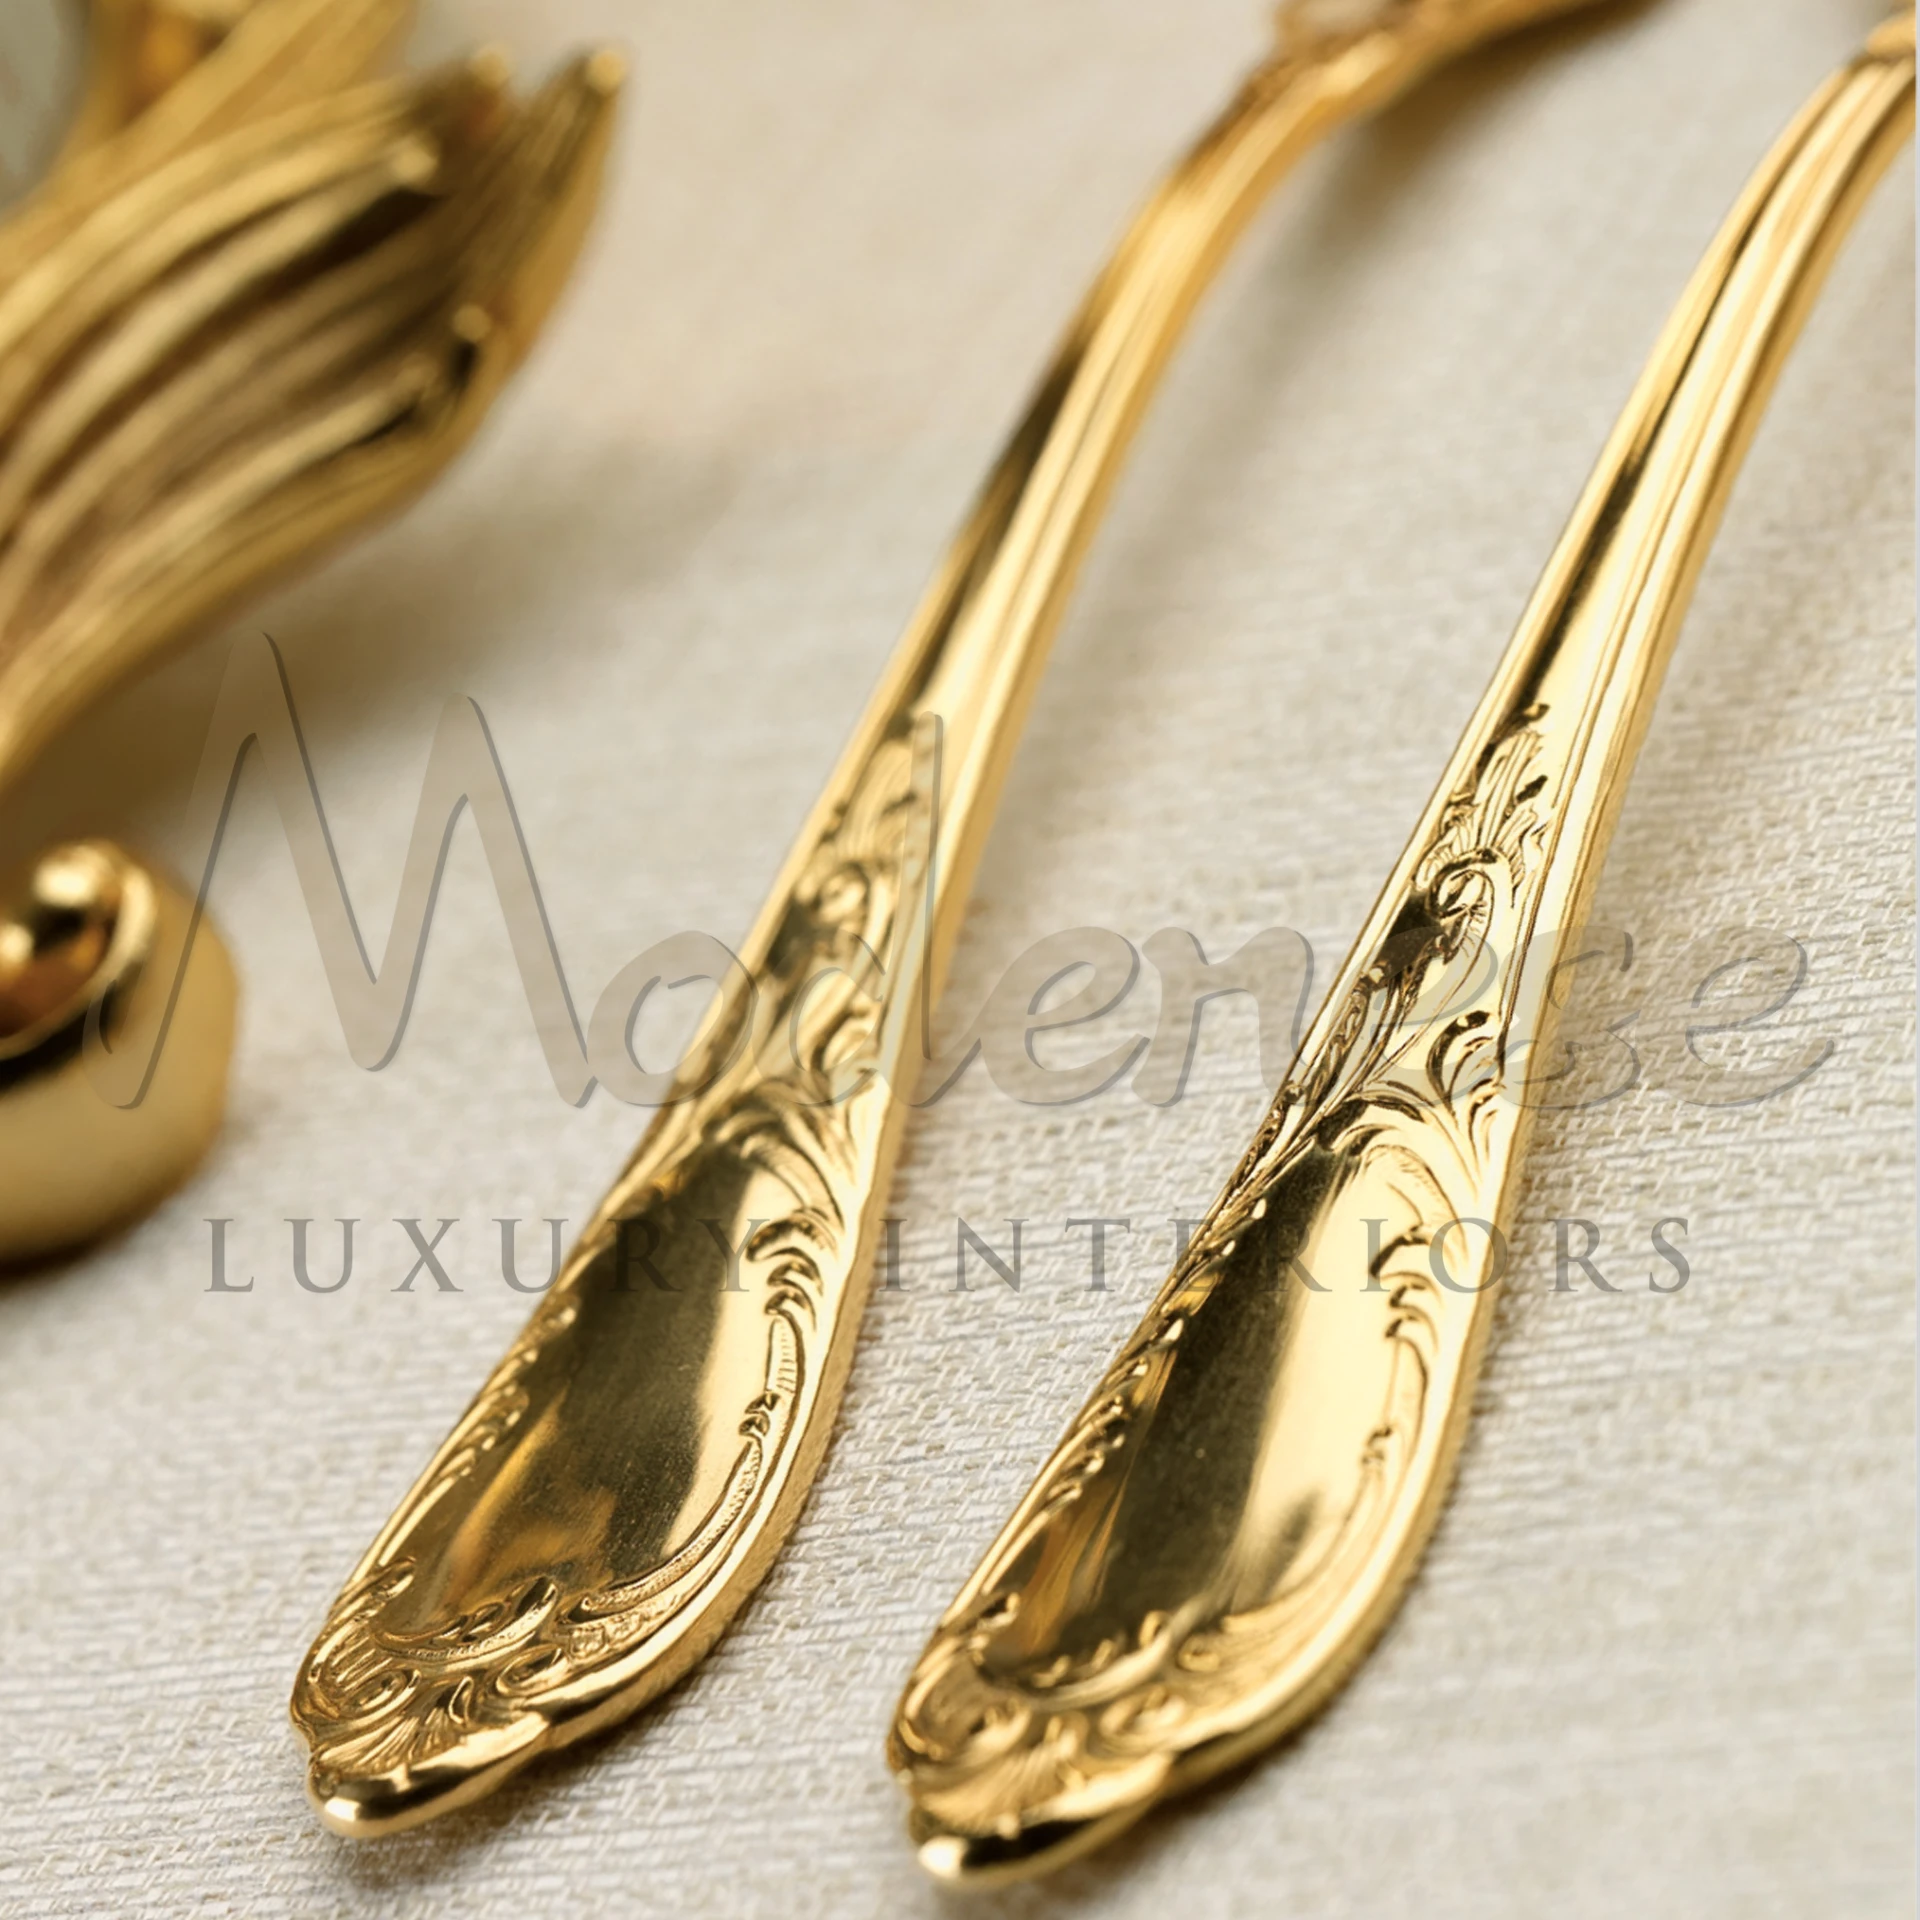 Close-up of decorative gold spoon and fork on table